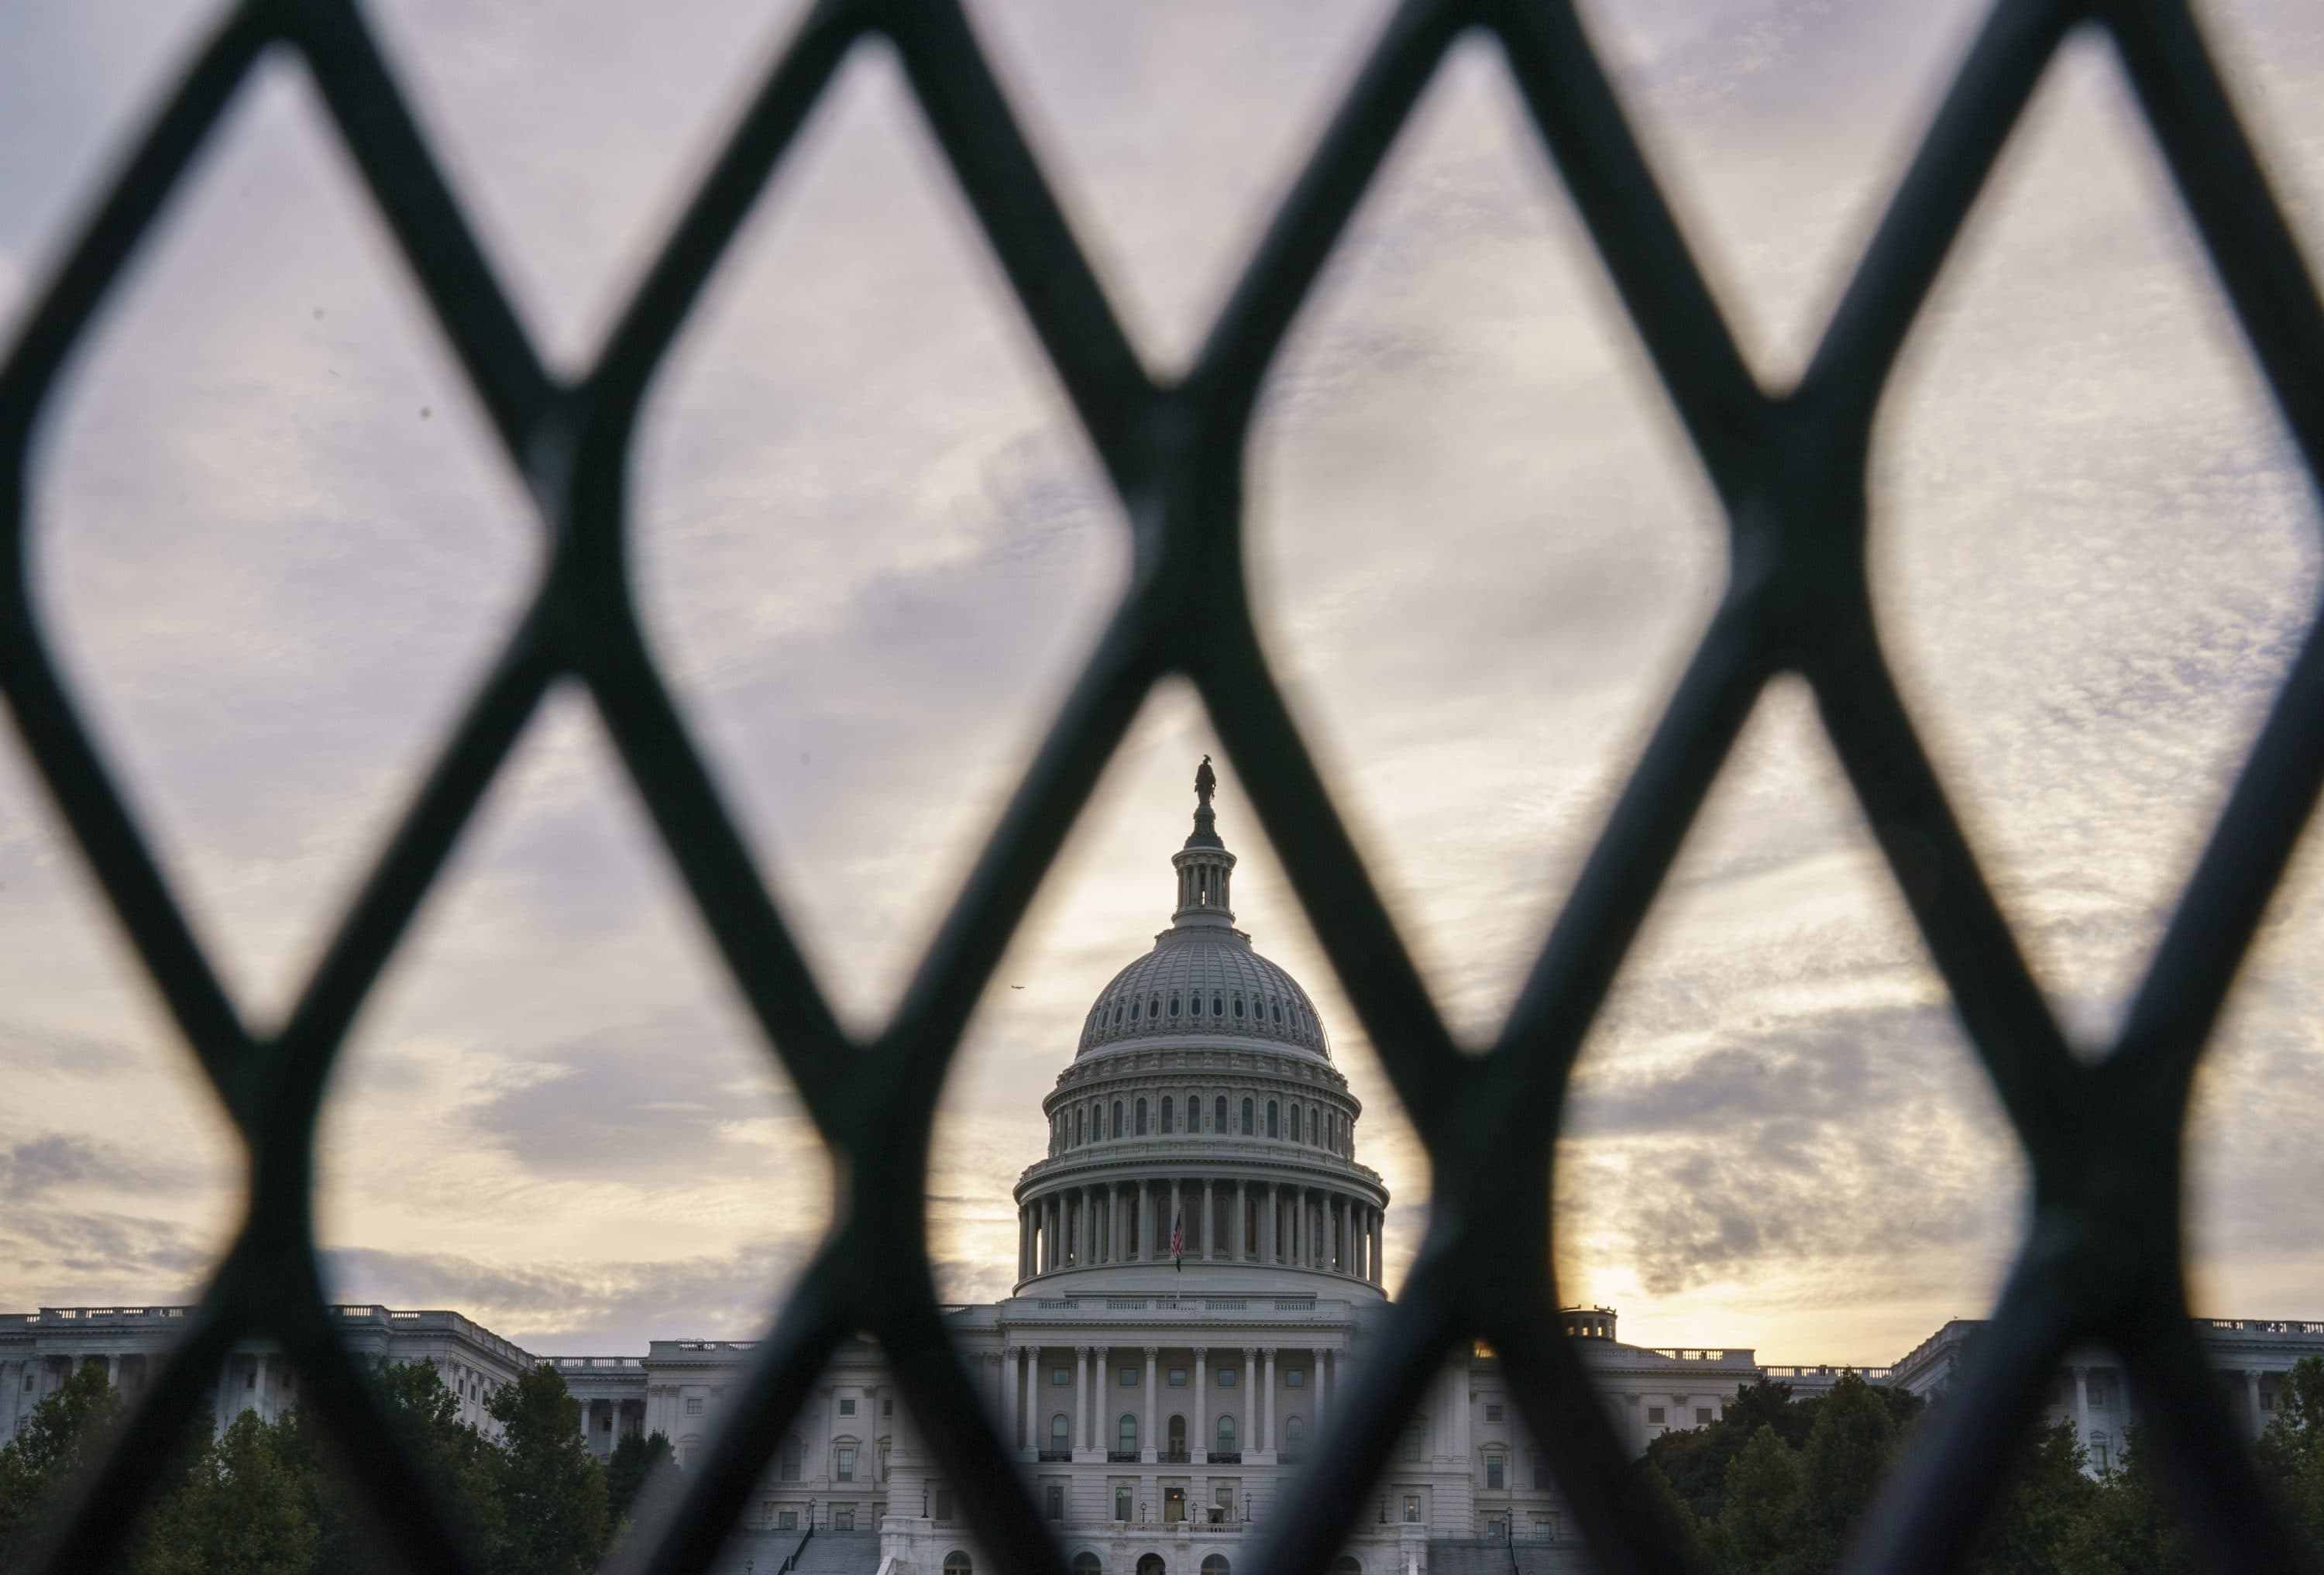 Security fencing has been reinstalled around the Capitol on Sept. 16, 2021, ahead of a planned Sept. 18 rally by far-right supporters of former President Donald Trump who are demanding the release of rioters arrested in connection with the Jan. 6 insurrection. (J. Scott Applewhite/AP)